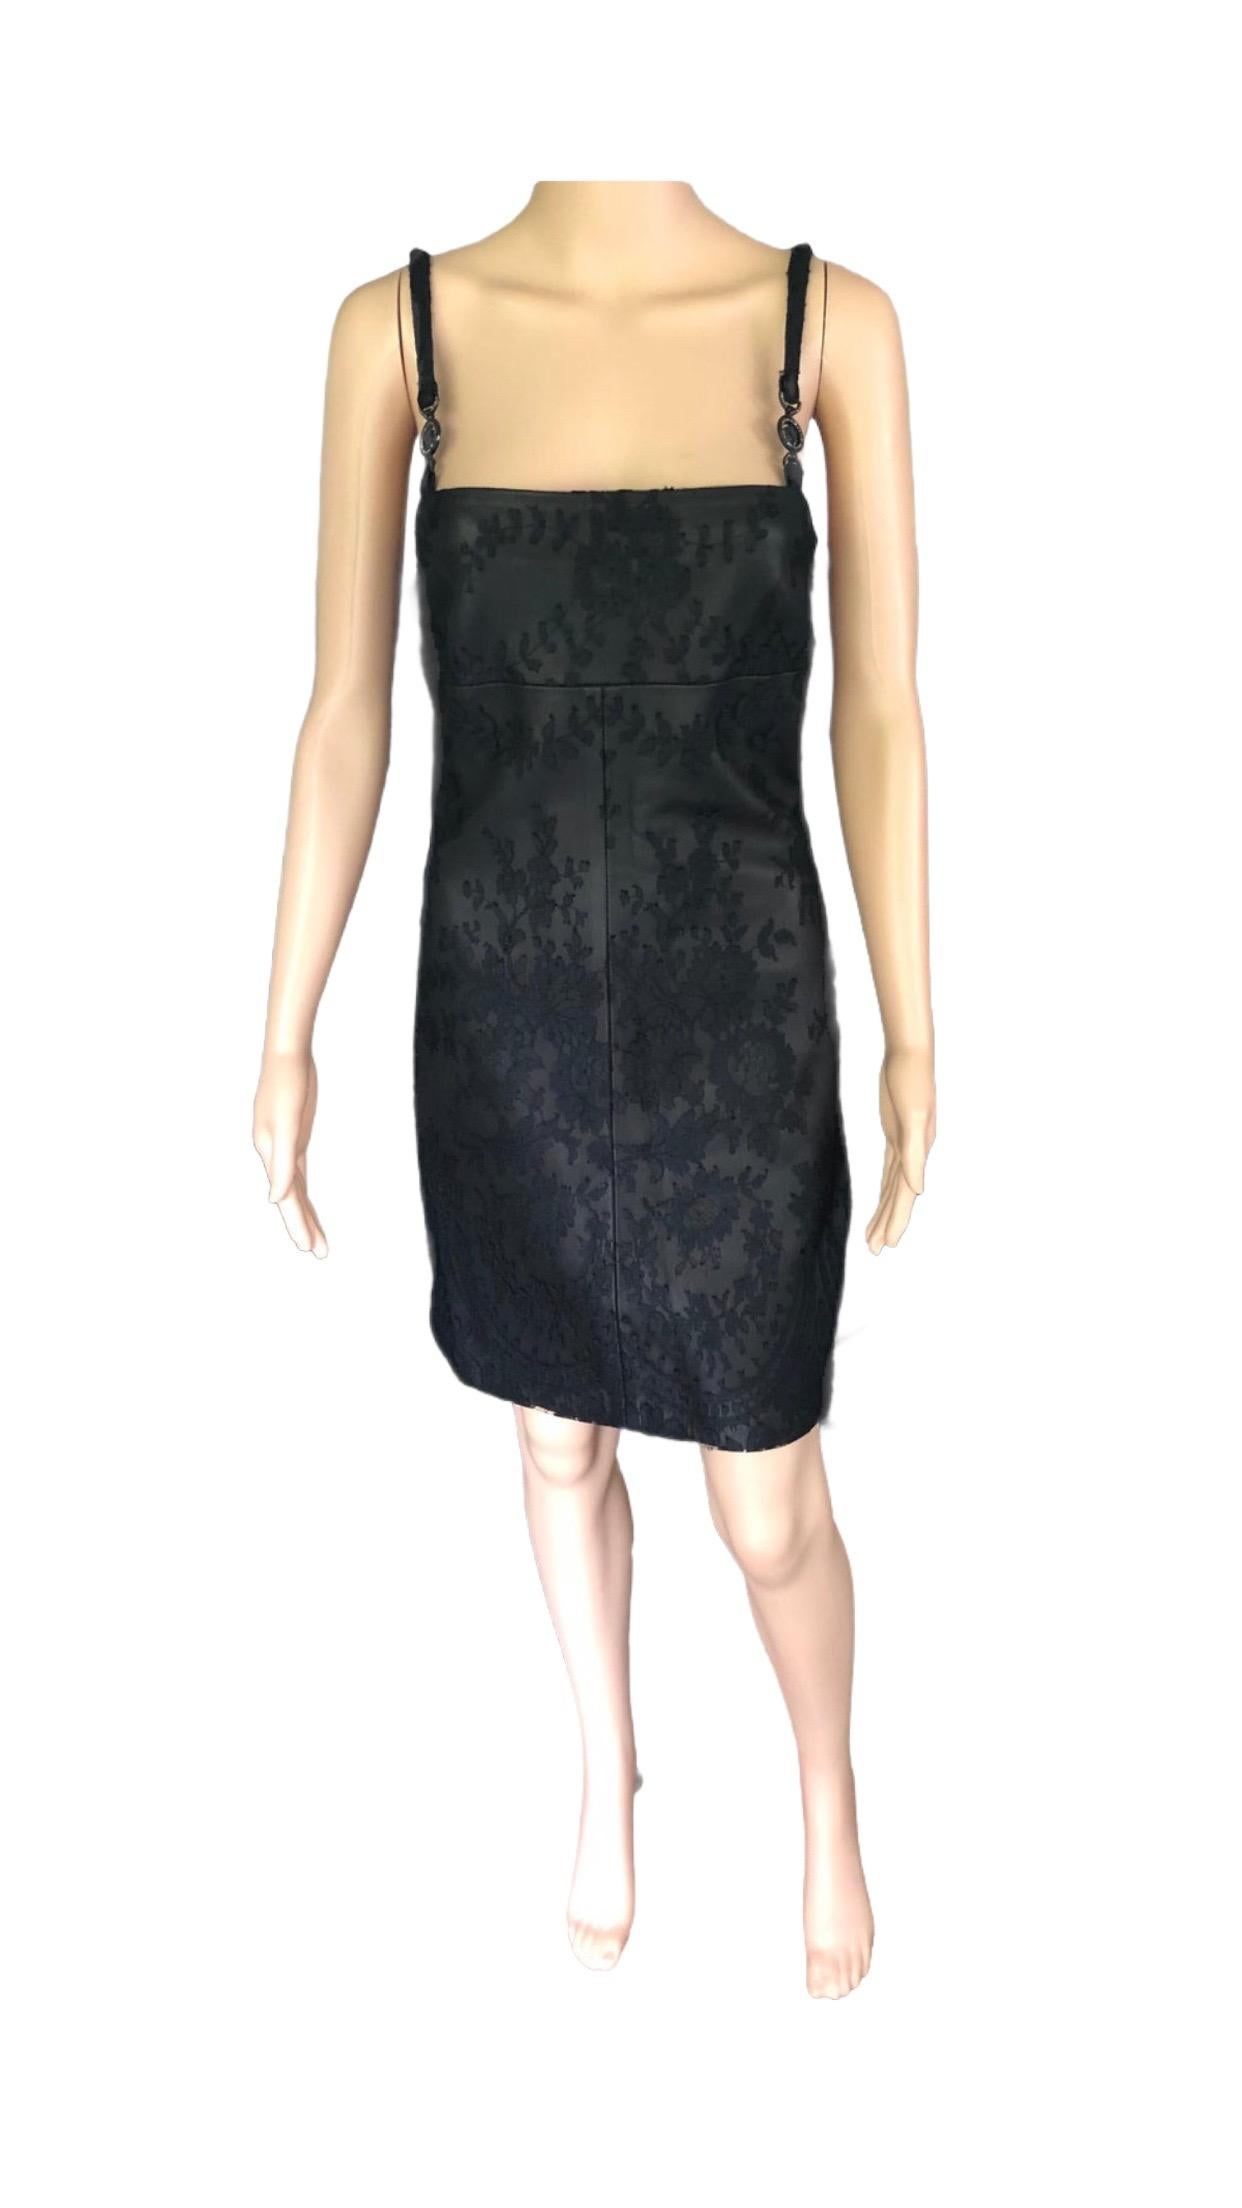 Gianni Versace F/W 1996 Vintage Lace and Leather Black Mini Dress  For Sale 3